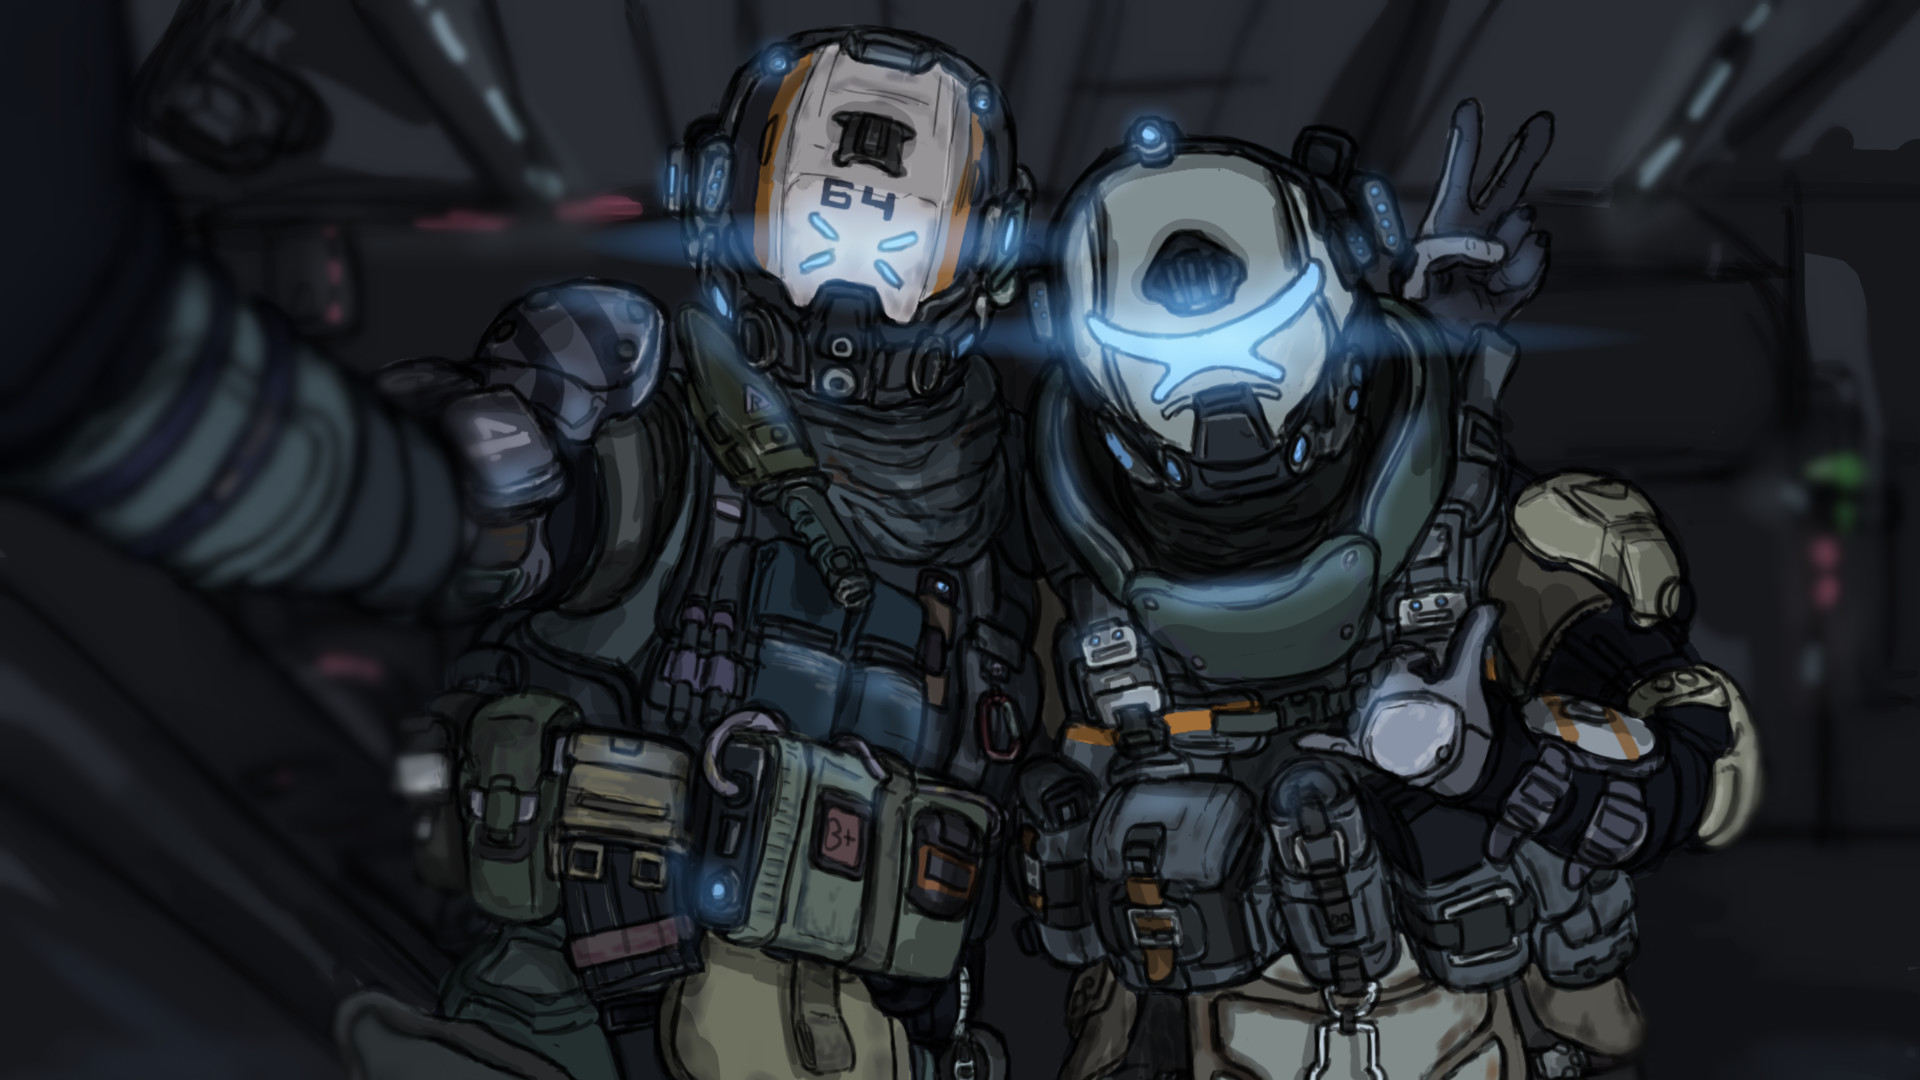 Some old titanfall fanart.